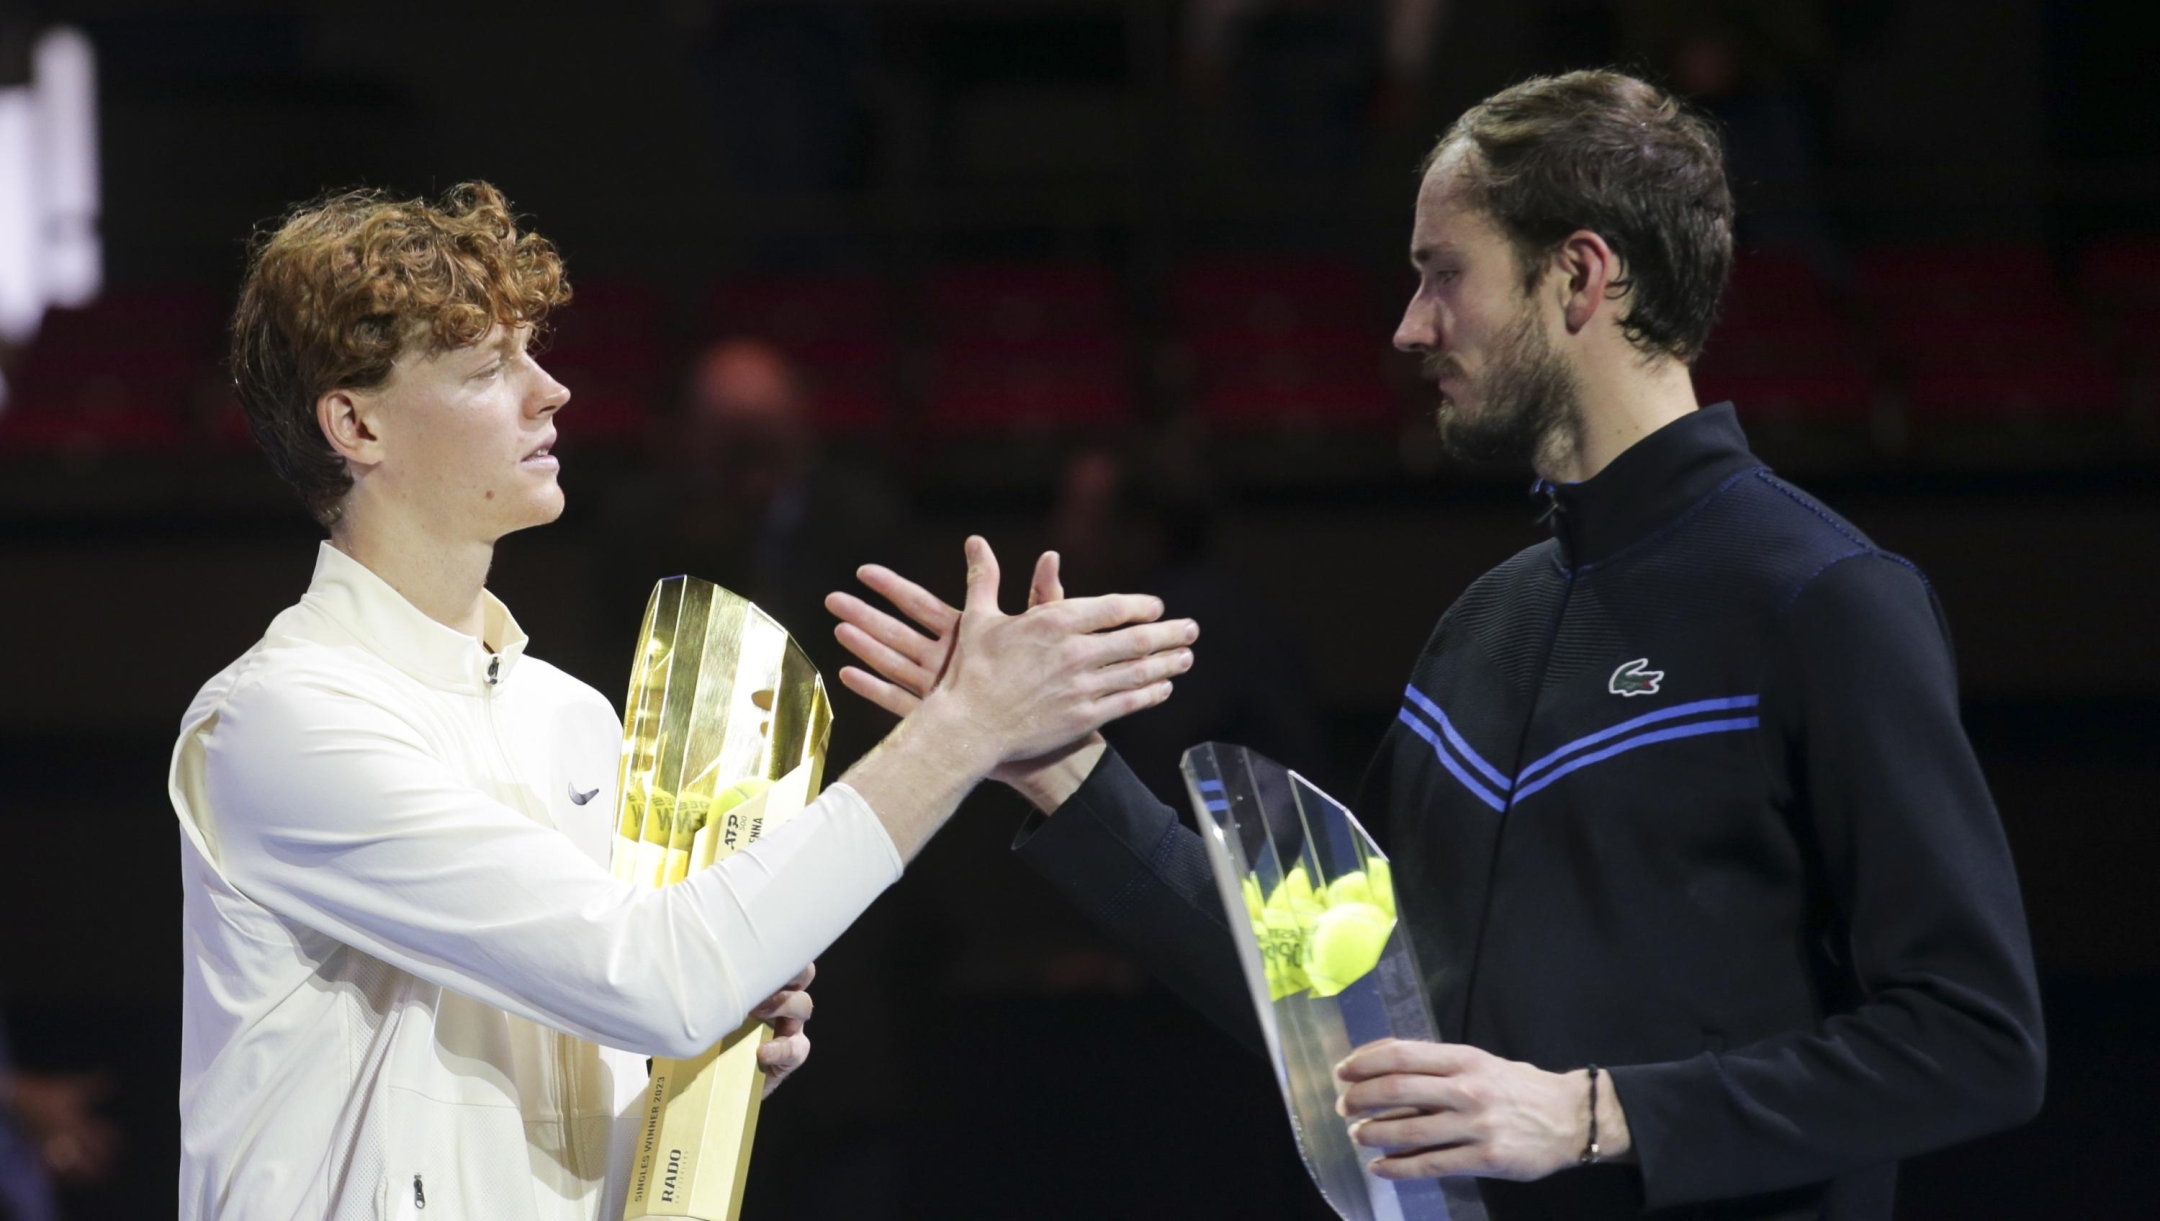 Jannik Sinner of Italy, left, celebrates with the trophy after winning the final match of the Erste Bank Open ATP tennis tournament against Daniil Medvedev of Russia, right, in Vienna, Austria, Sunday, Oct. 29, 2023. Sinner won 7-6 (7), 4-6, 6-3. (AP Photo/Heinz-Peter Bader)